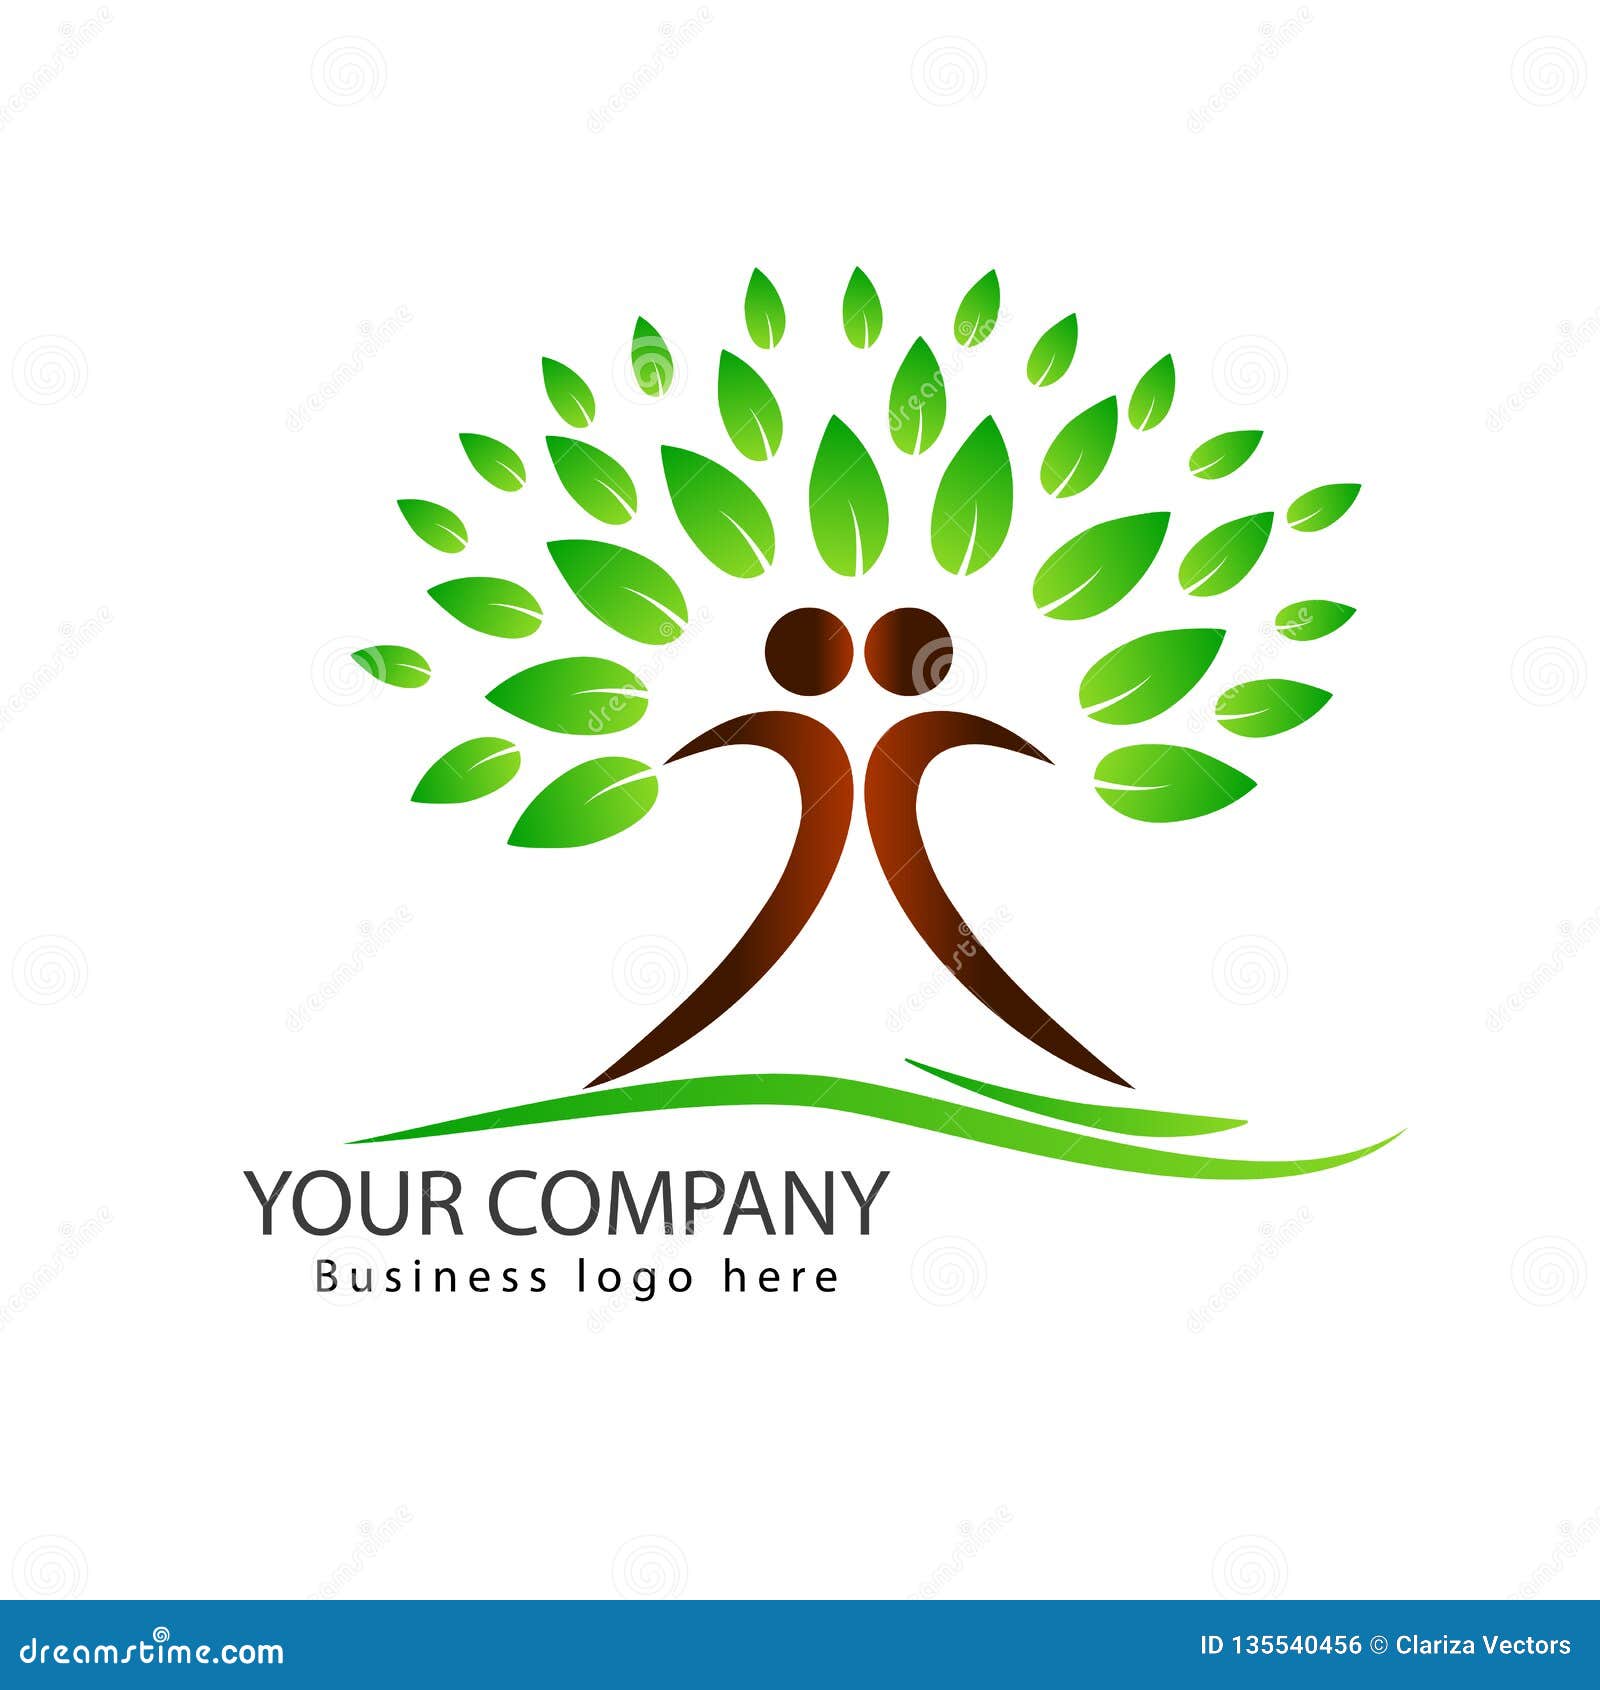 People Tree Logo Design With Green Leaves Couple Tree ...